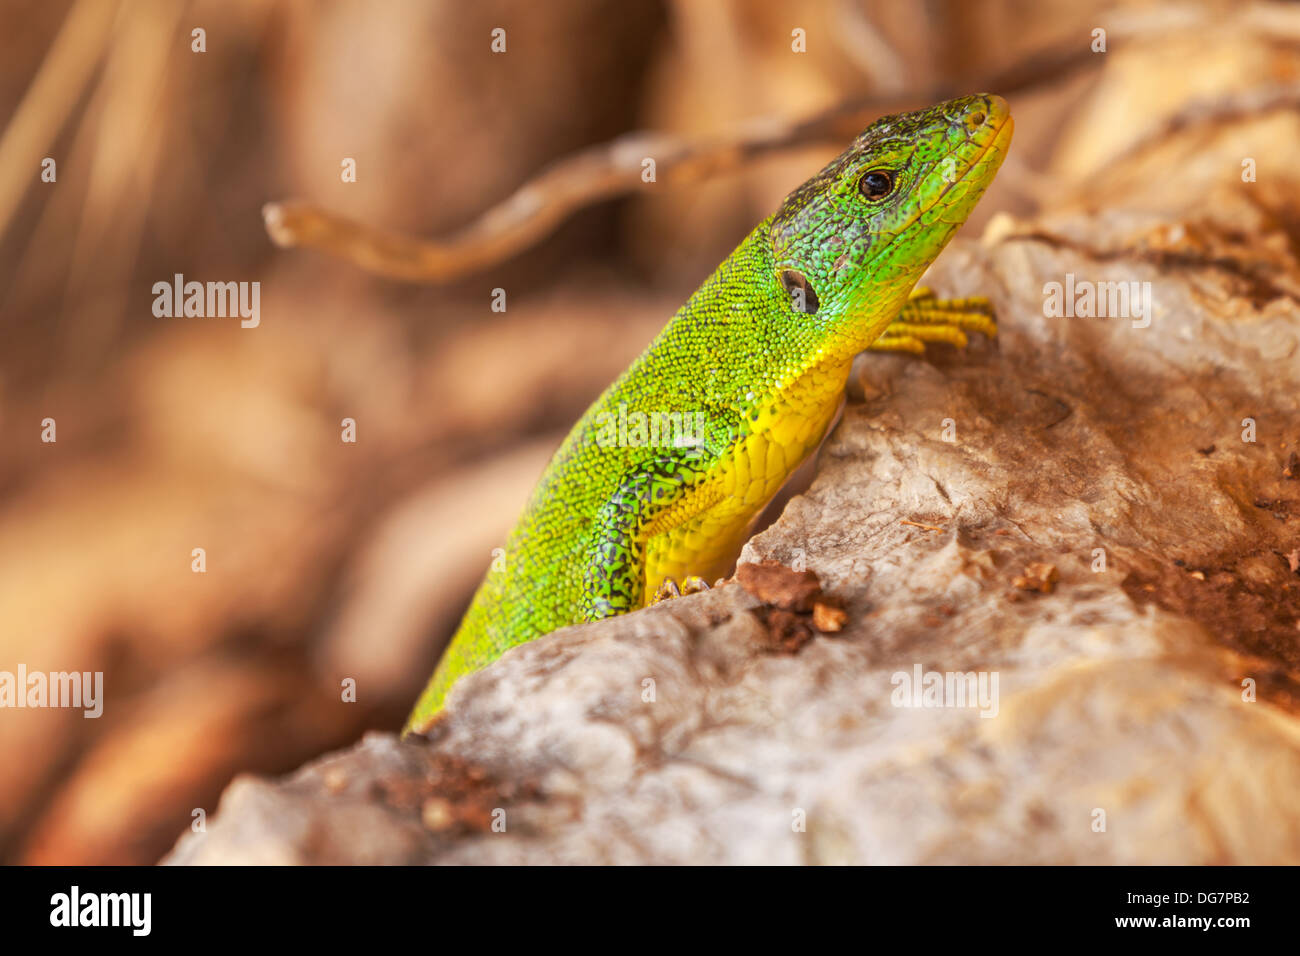 Green lizard sit on red dry stones Stock Photo